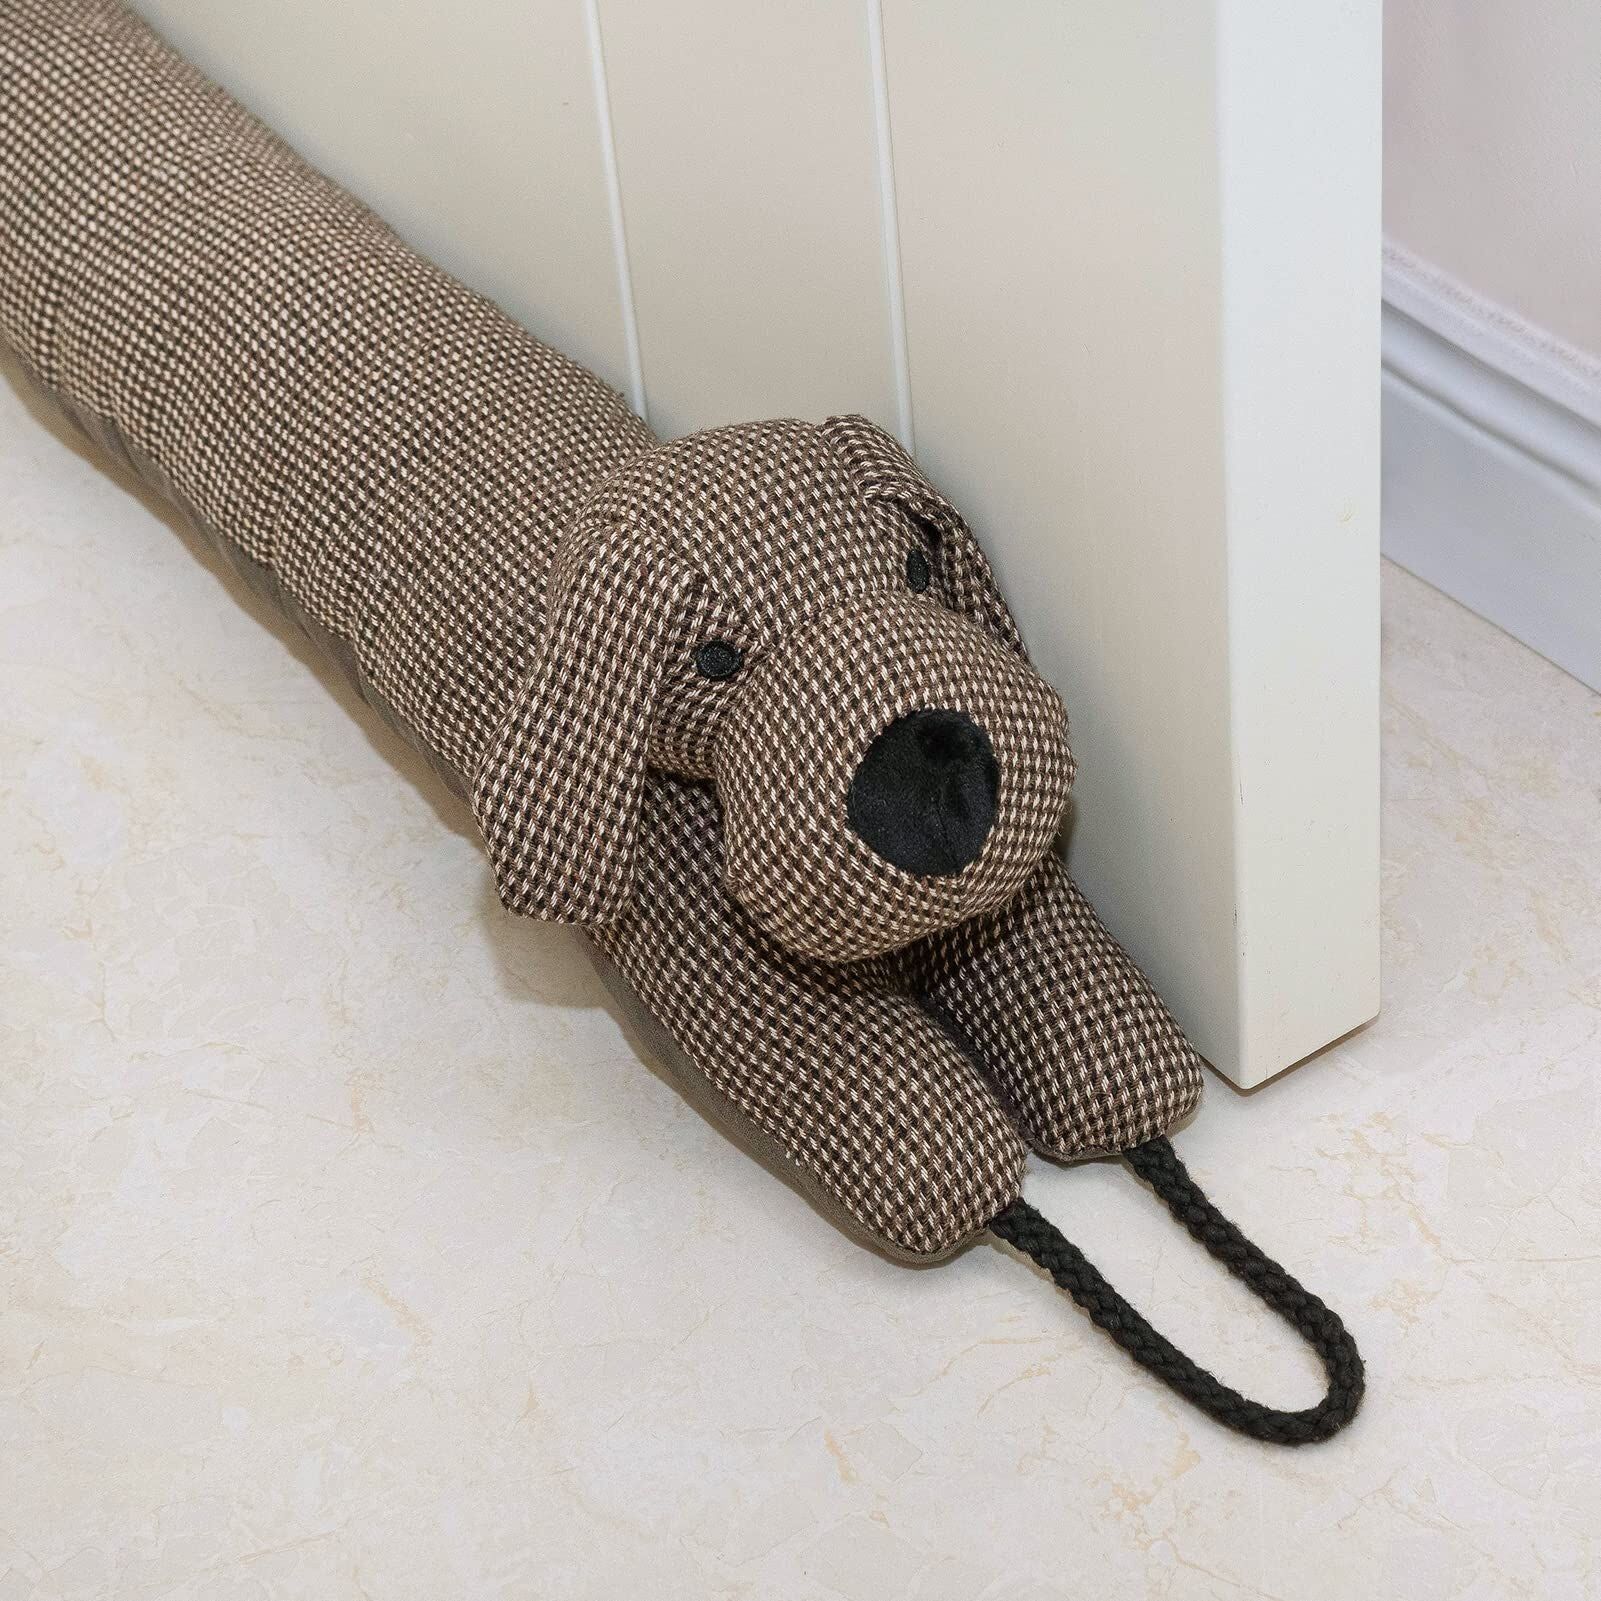 Marwood Under Door Draft Stopper Decorative Wind Stopper 36 inch for Door & Window, Weighted Animal Air Draft Stopper Snake Noise Blocker for Bottom of Door with Hanging Loops - Brown Dog - Brand New